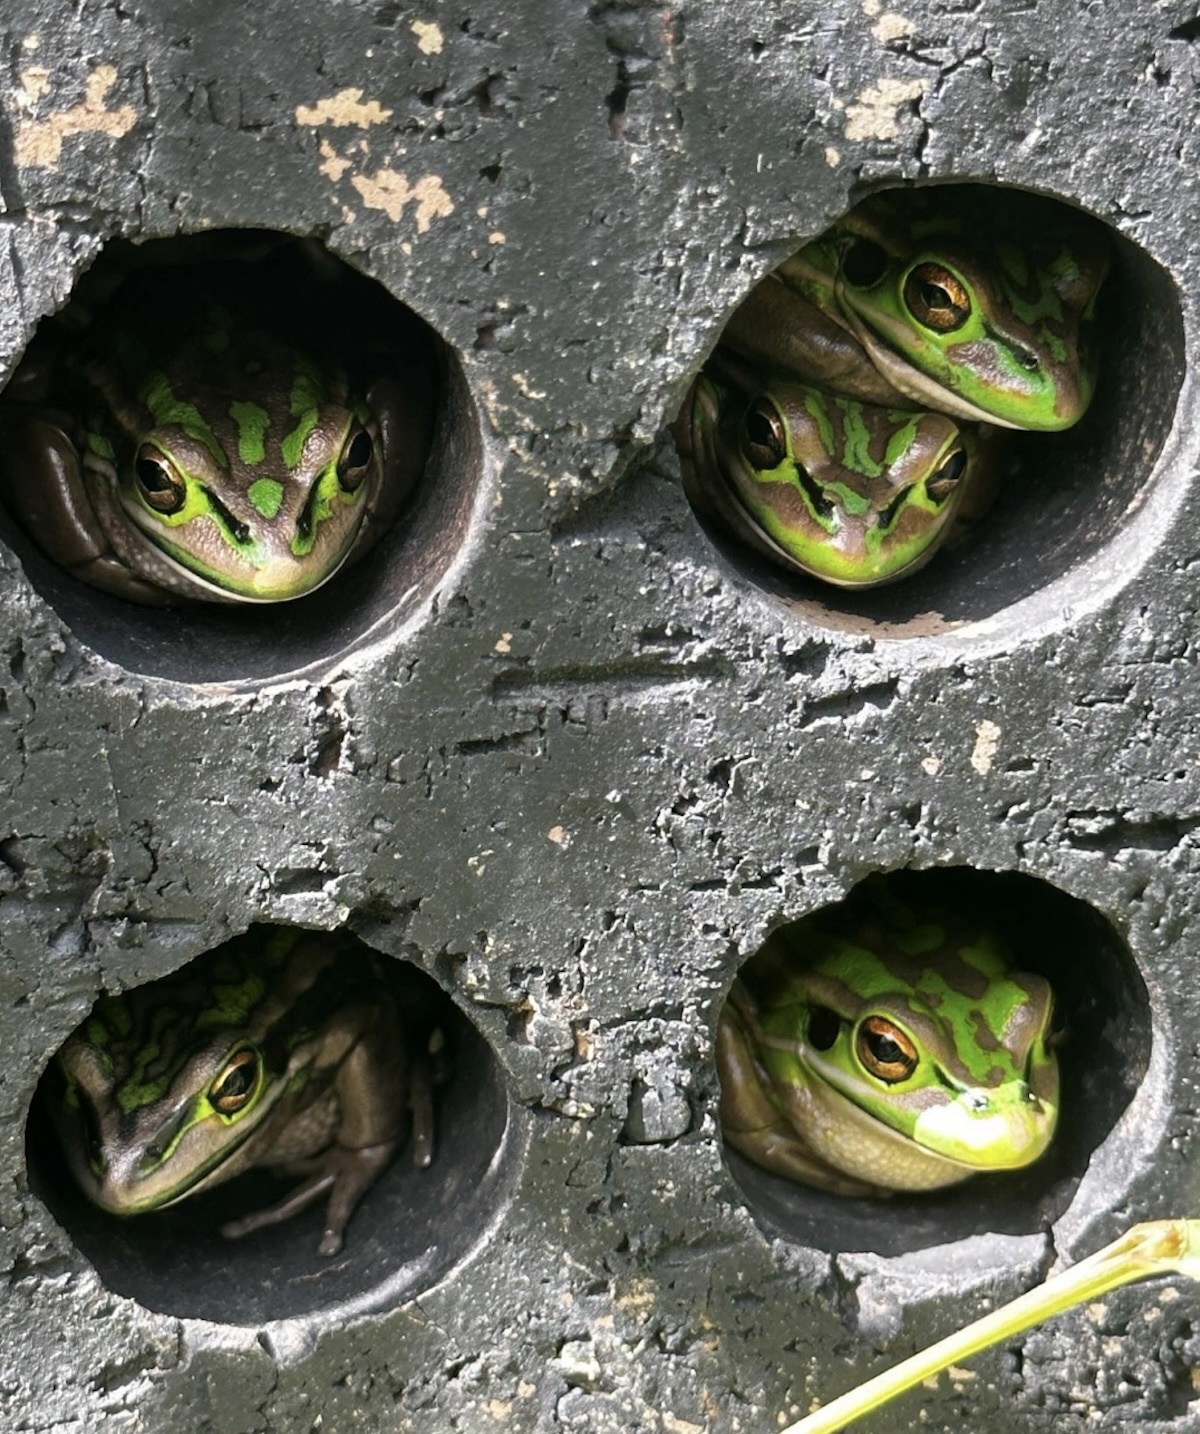 Researchers developed a brick-filled greenhouse warmed by sunlight that helps frogs survive a fungus that can’t tolerate high temperatures.